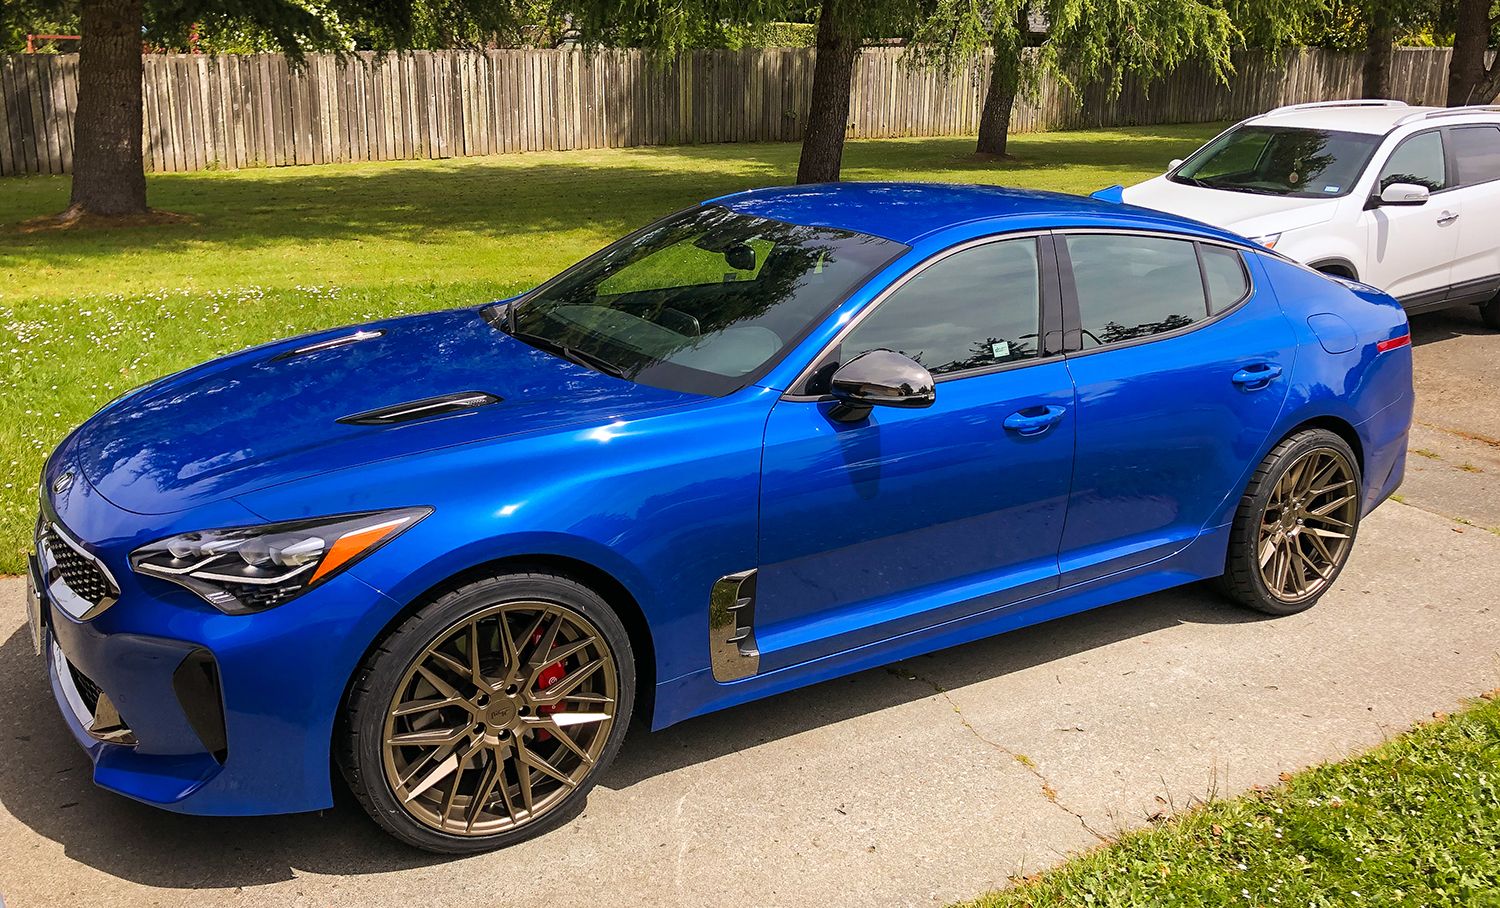 Wheel Front | Gallery - Blue Kia Stinger with bronze 20x9.5 and 20x10.5 Nic...